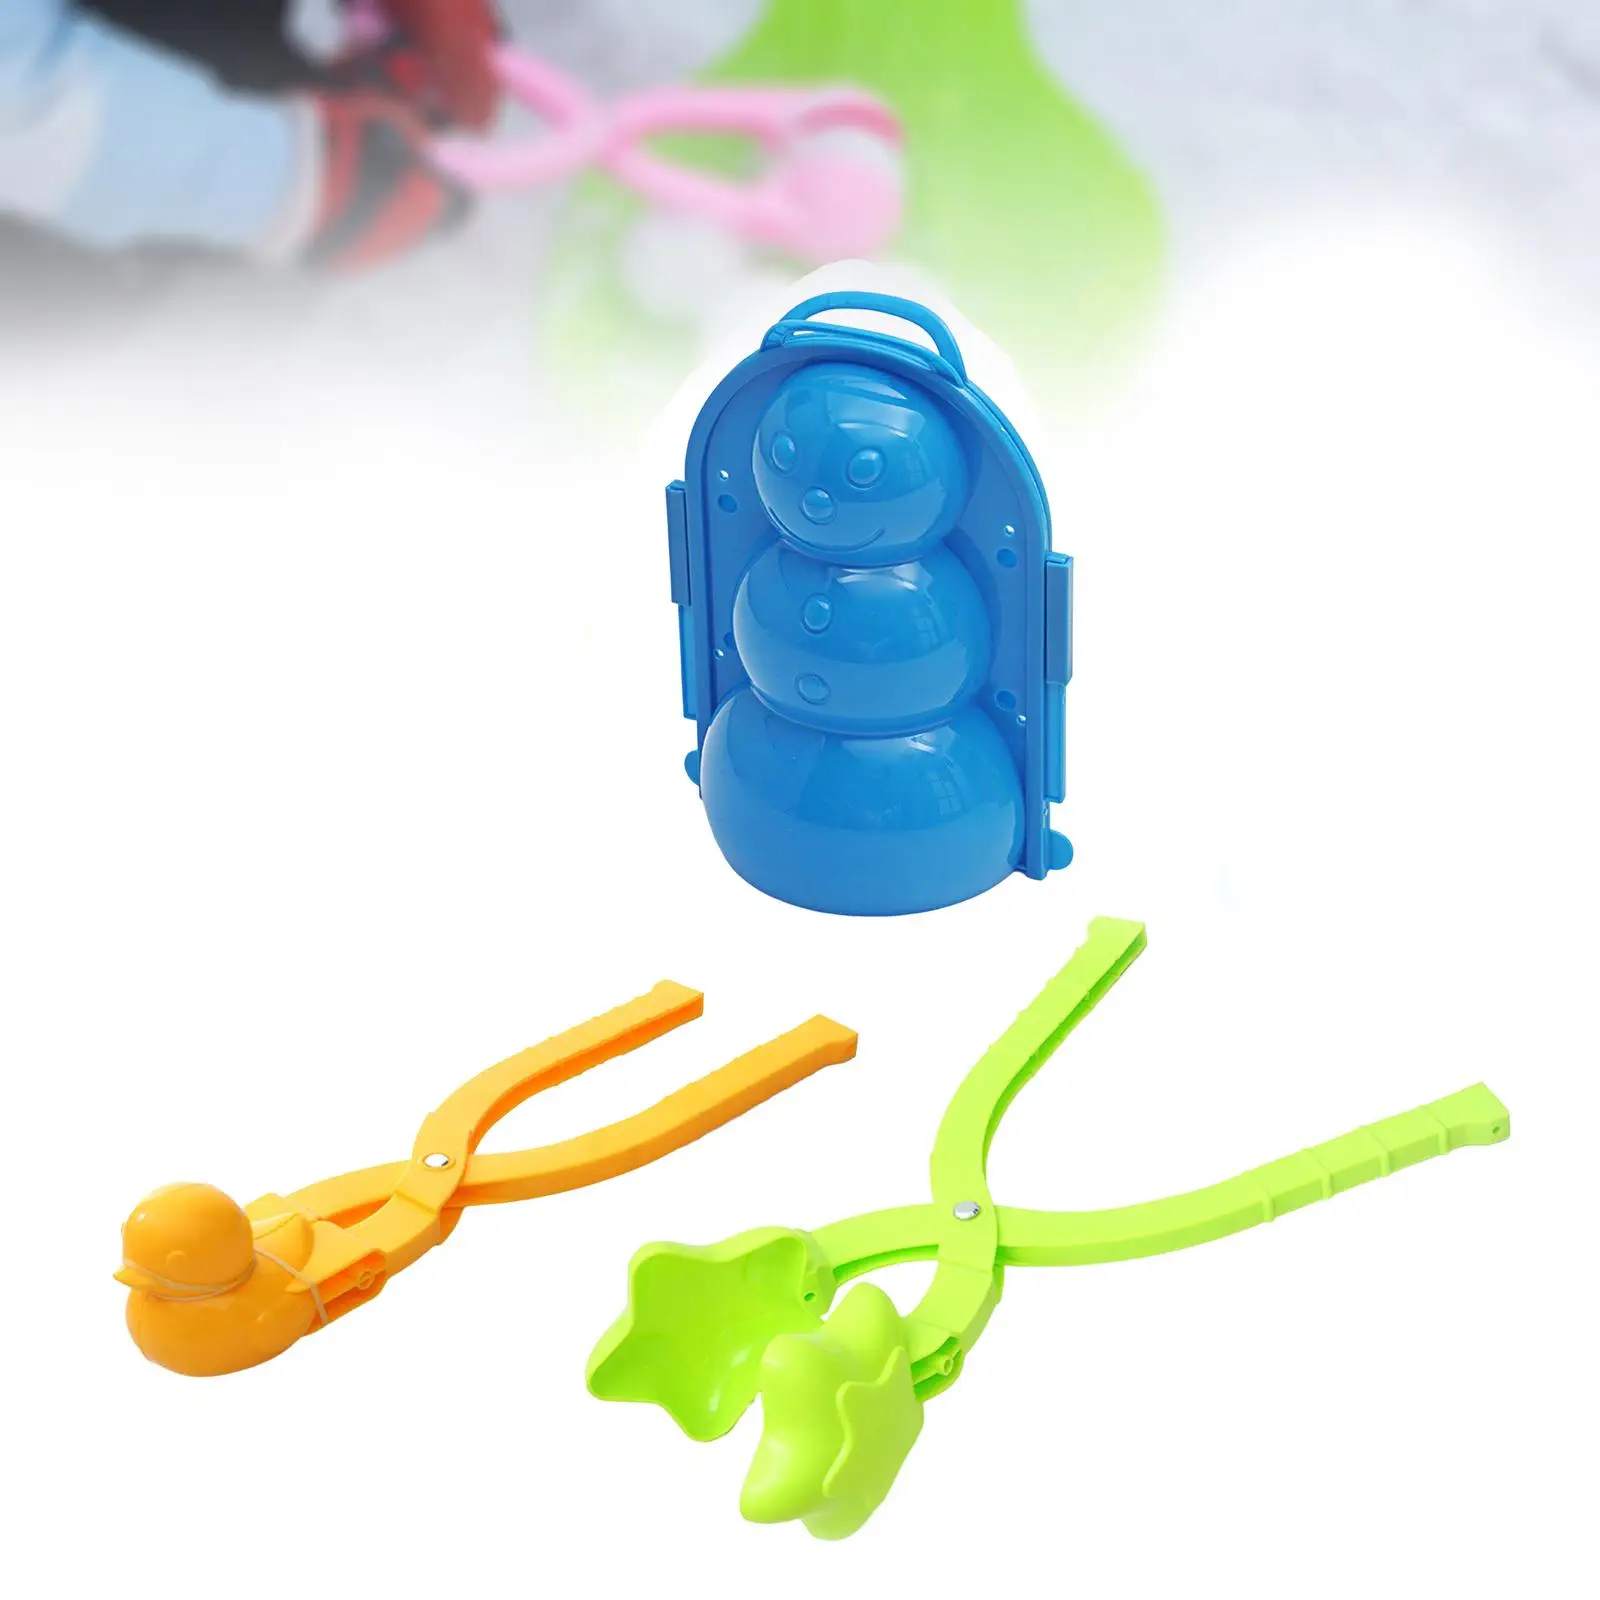 Cartoon Snowball Clamp Wear Resistant Snow Ball Making Tools for Outdoor Activities Winter Sports Beach Party